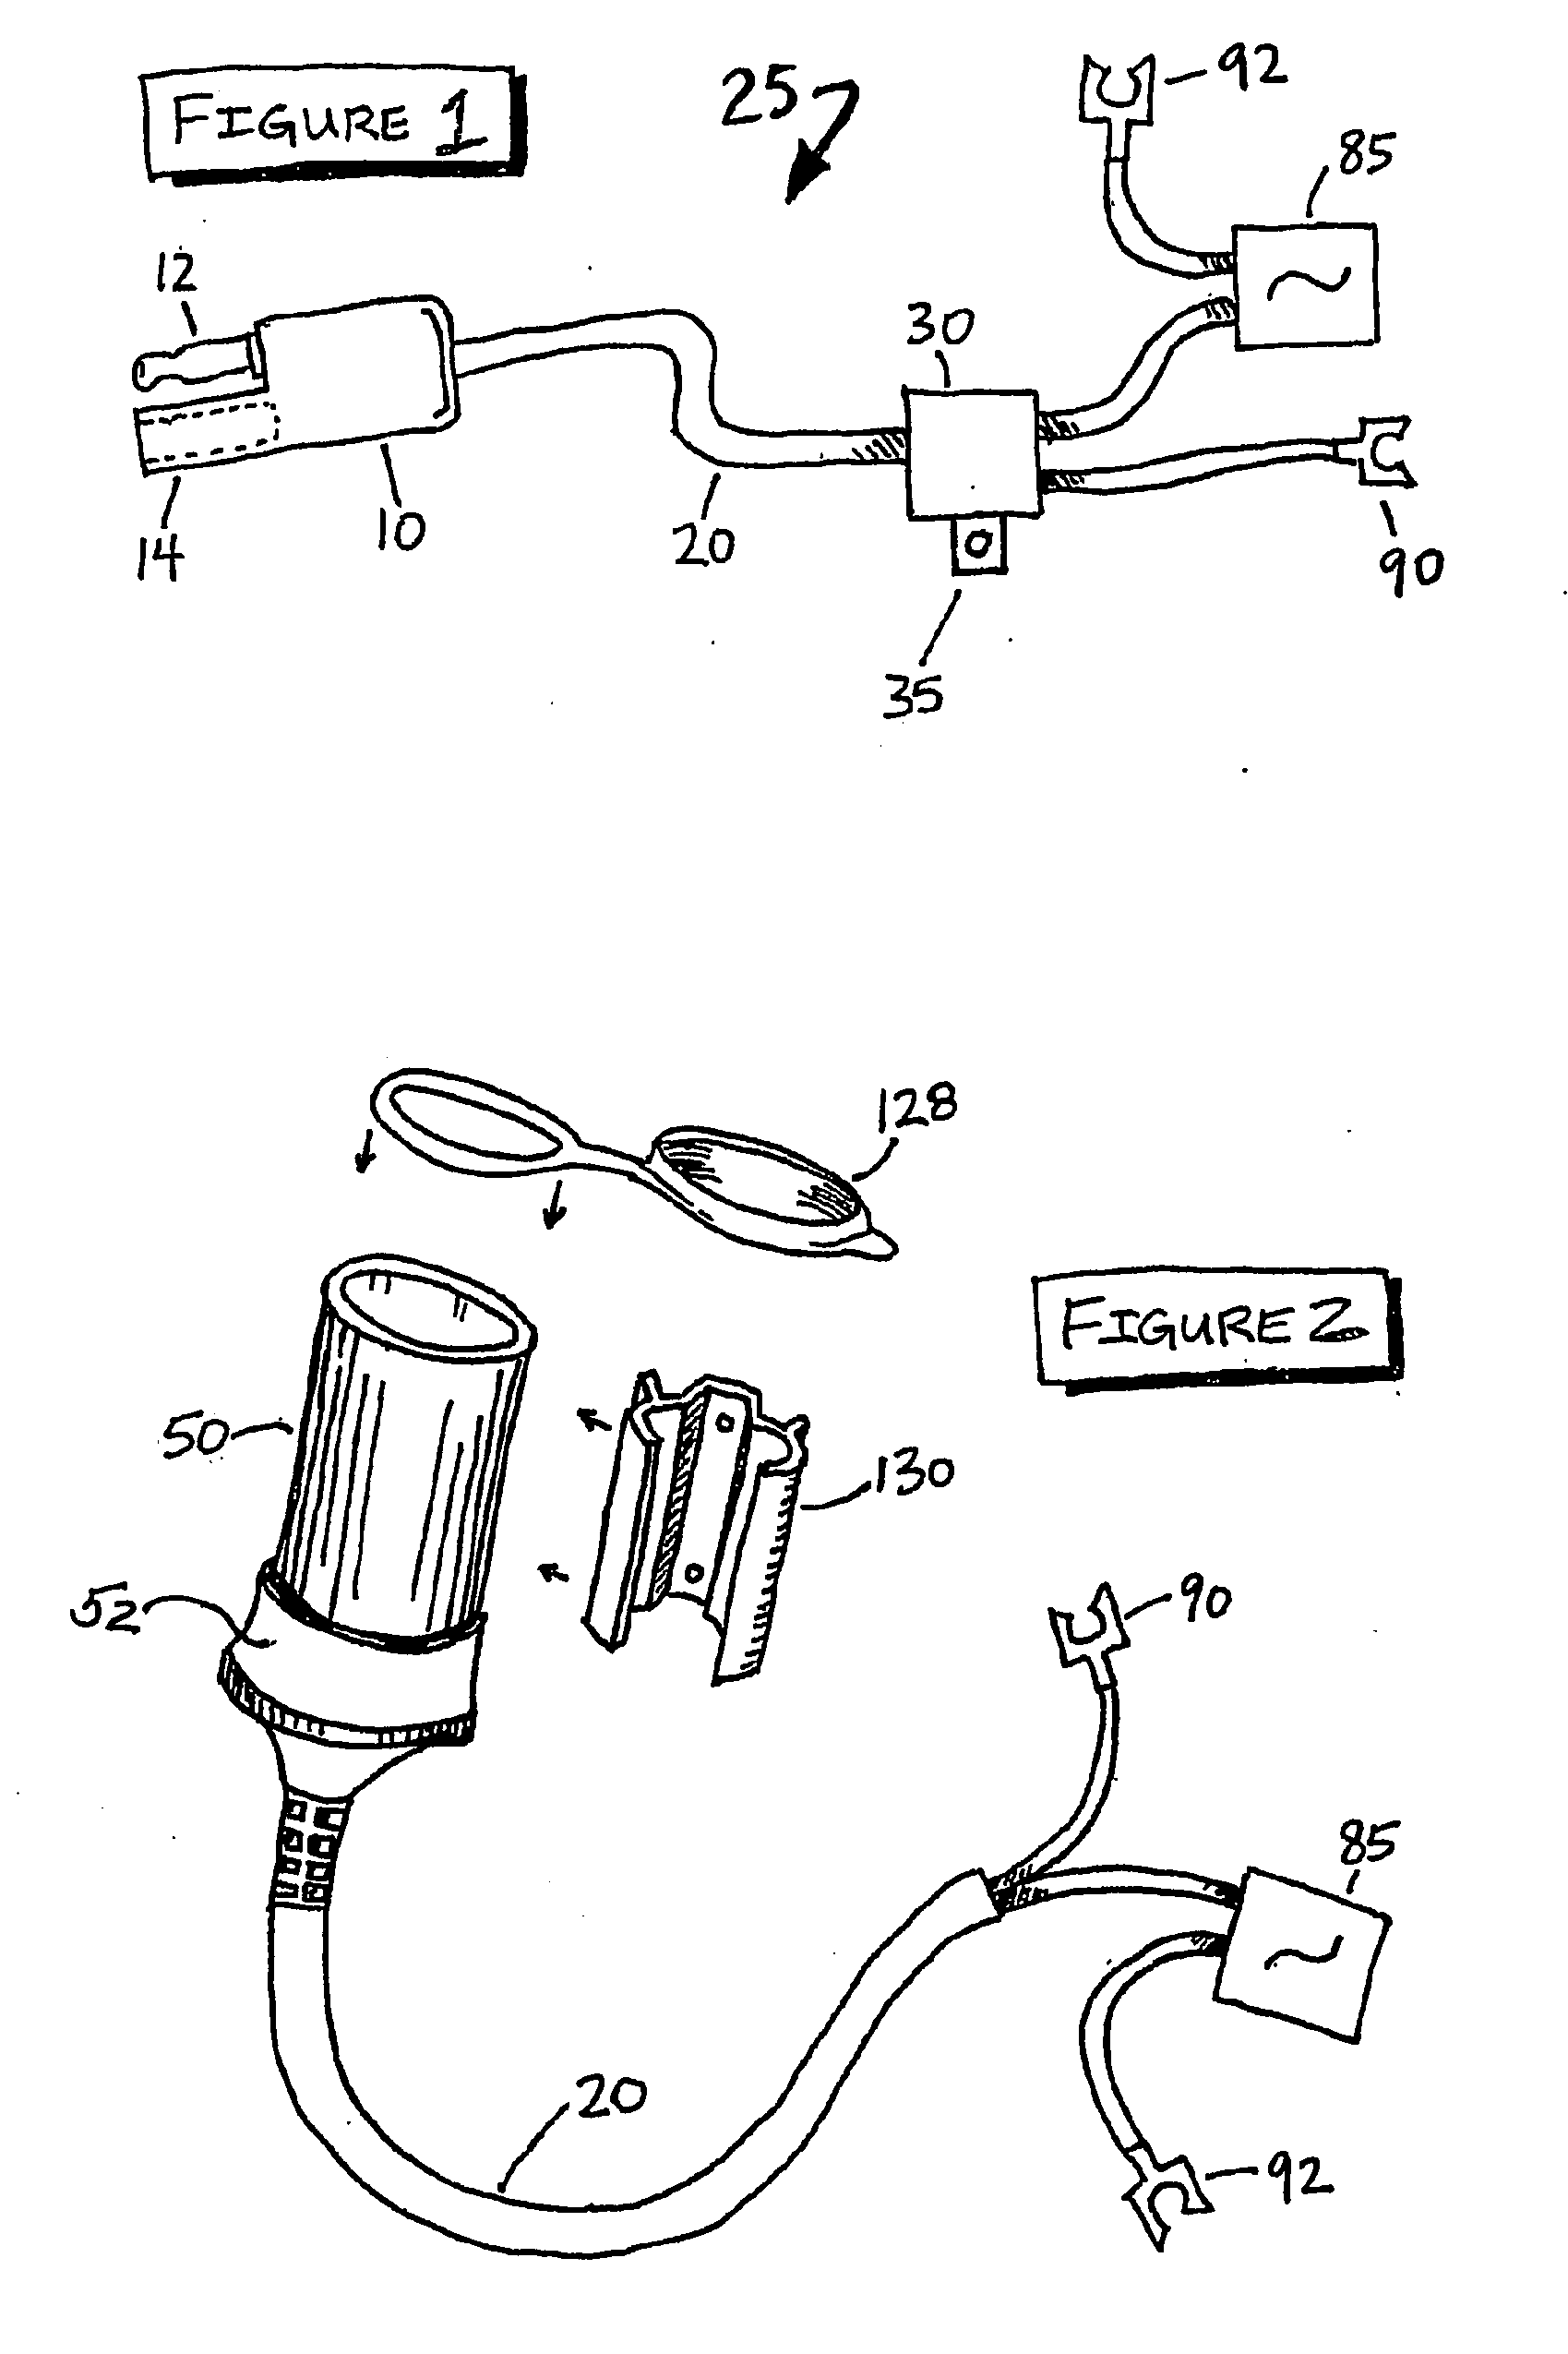 Vehicle Accessory Power Connector